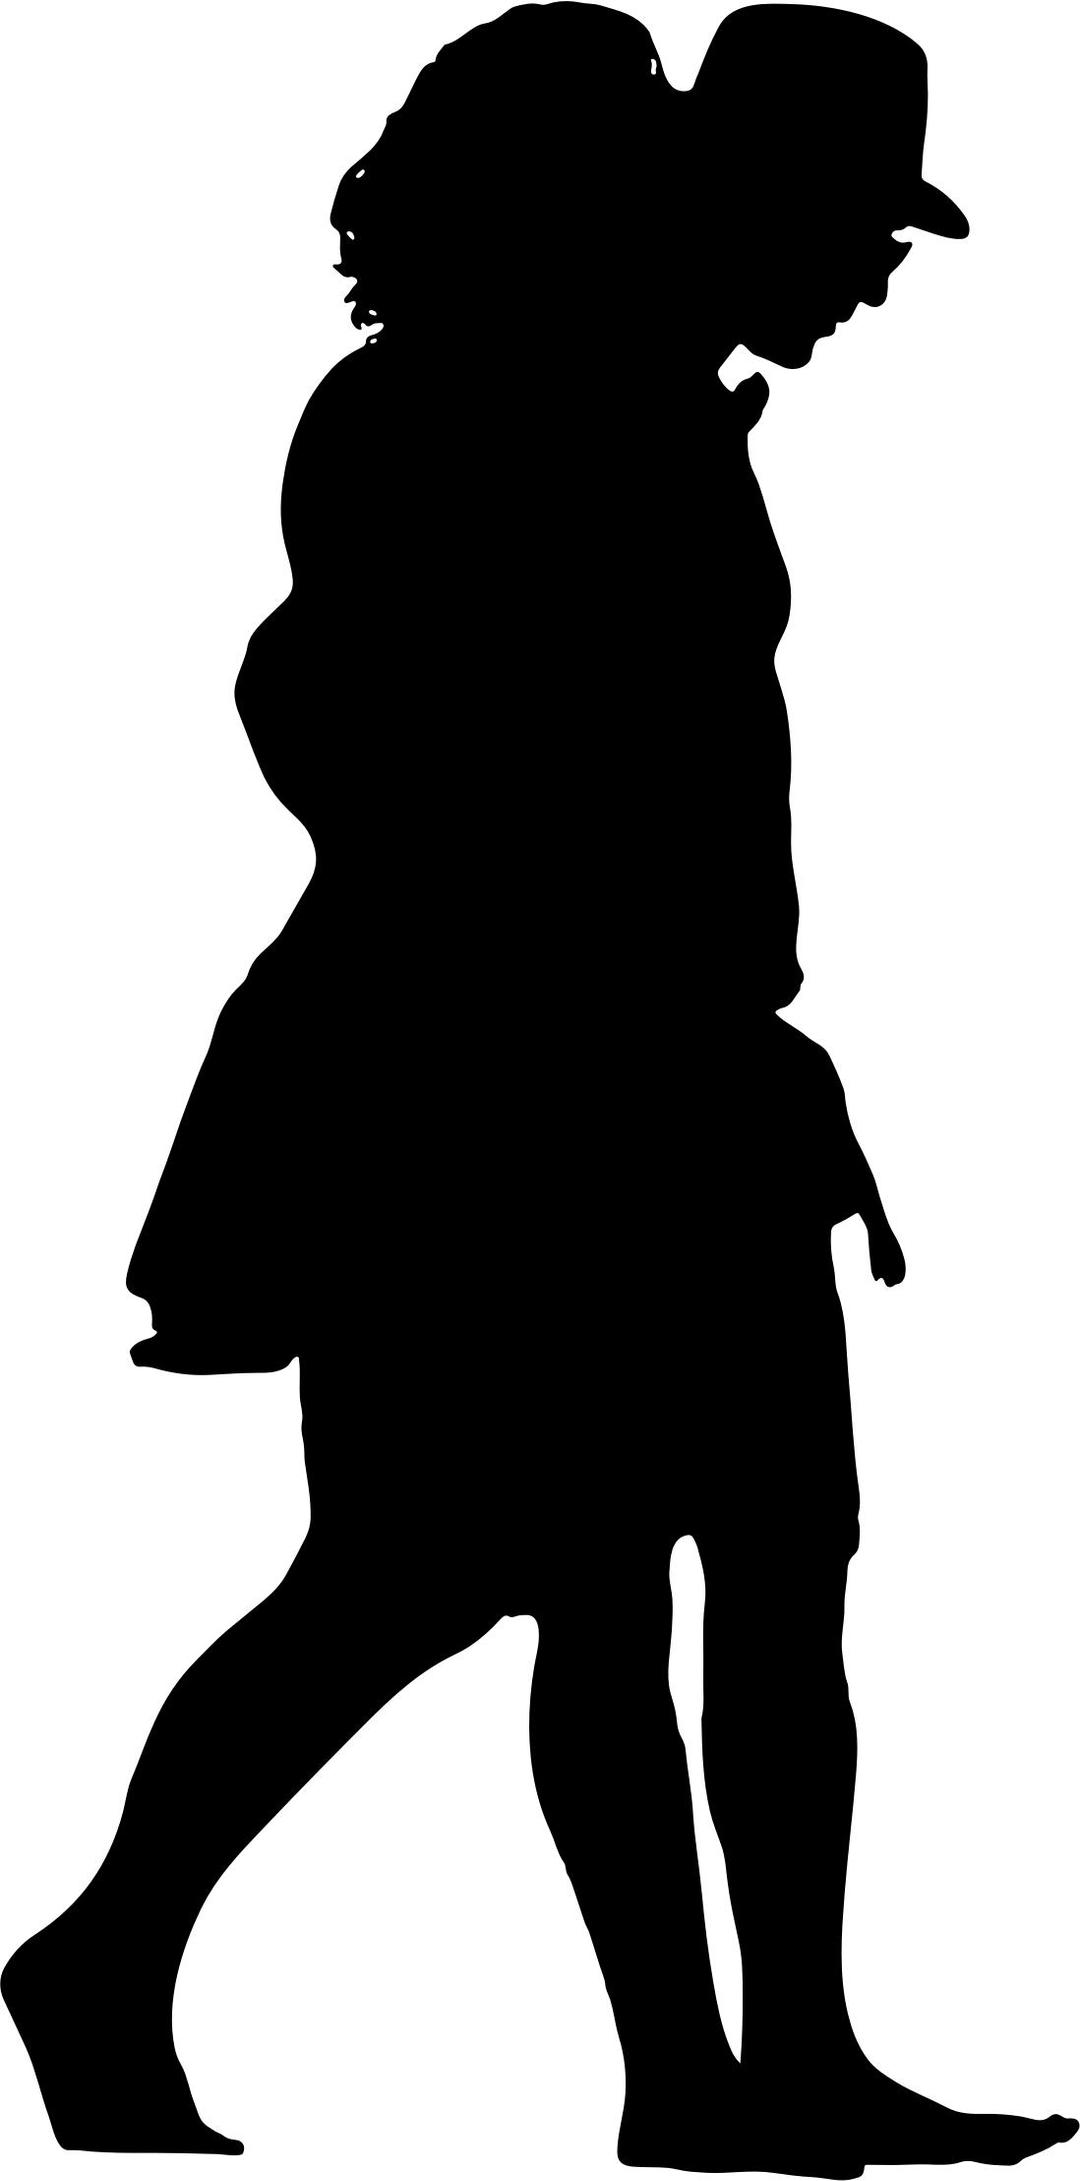 Couple Walking Silhouette png transparent